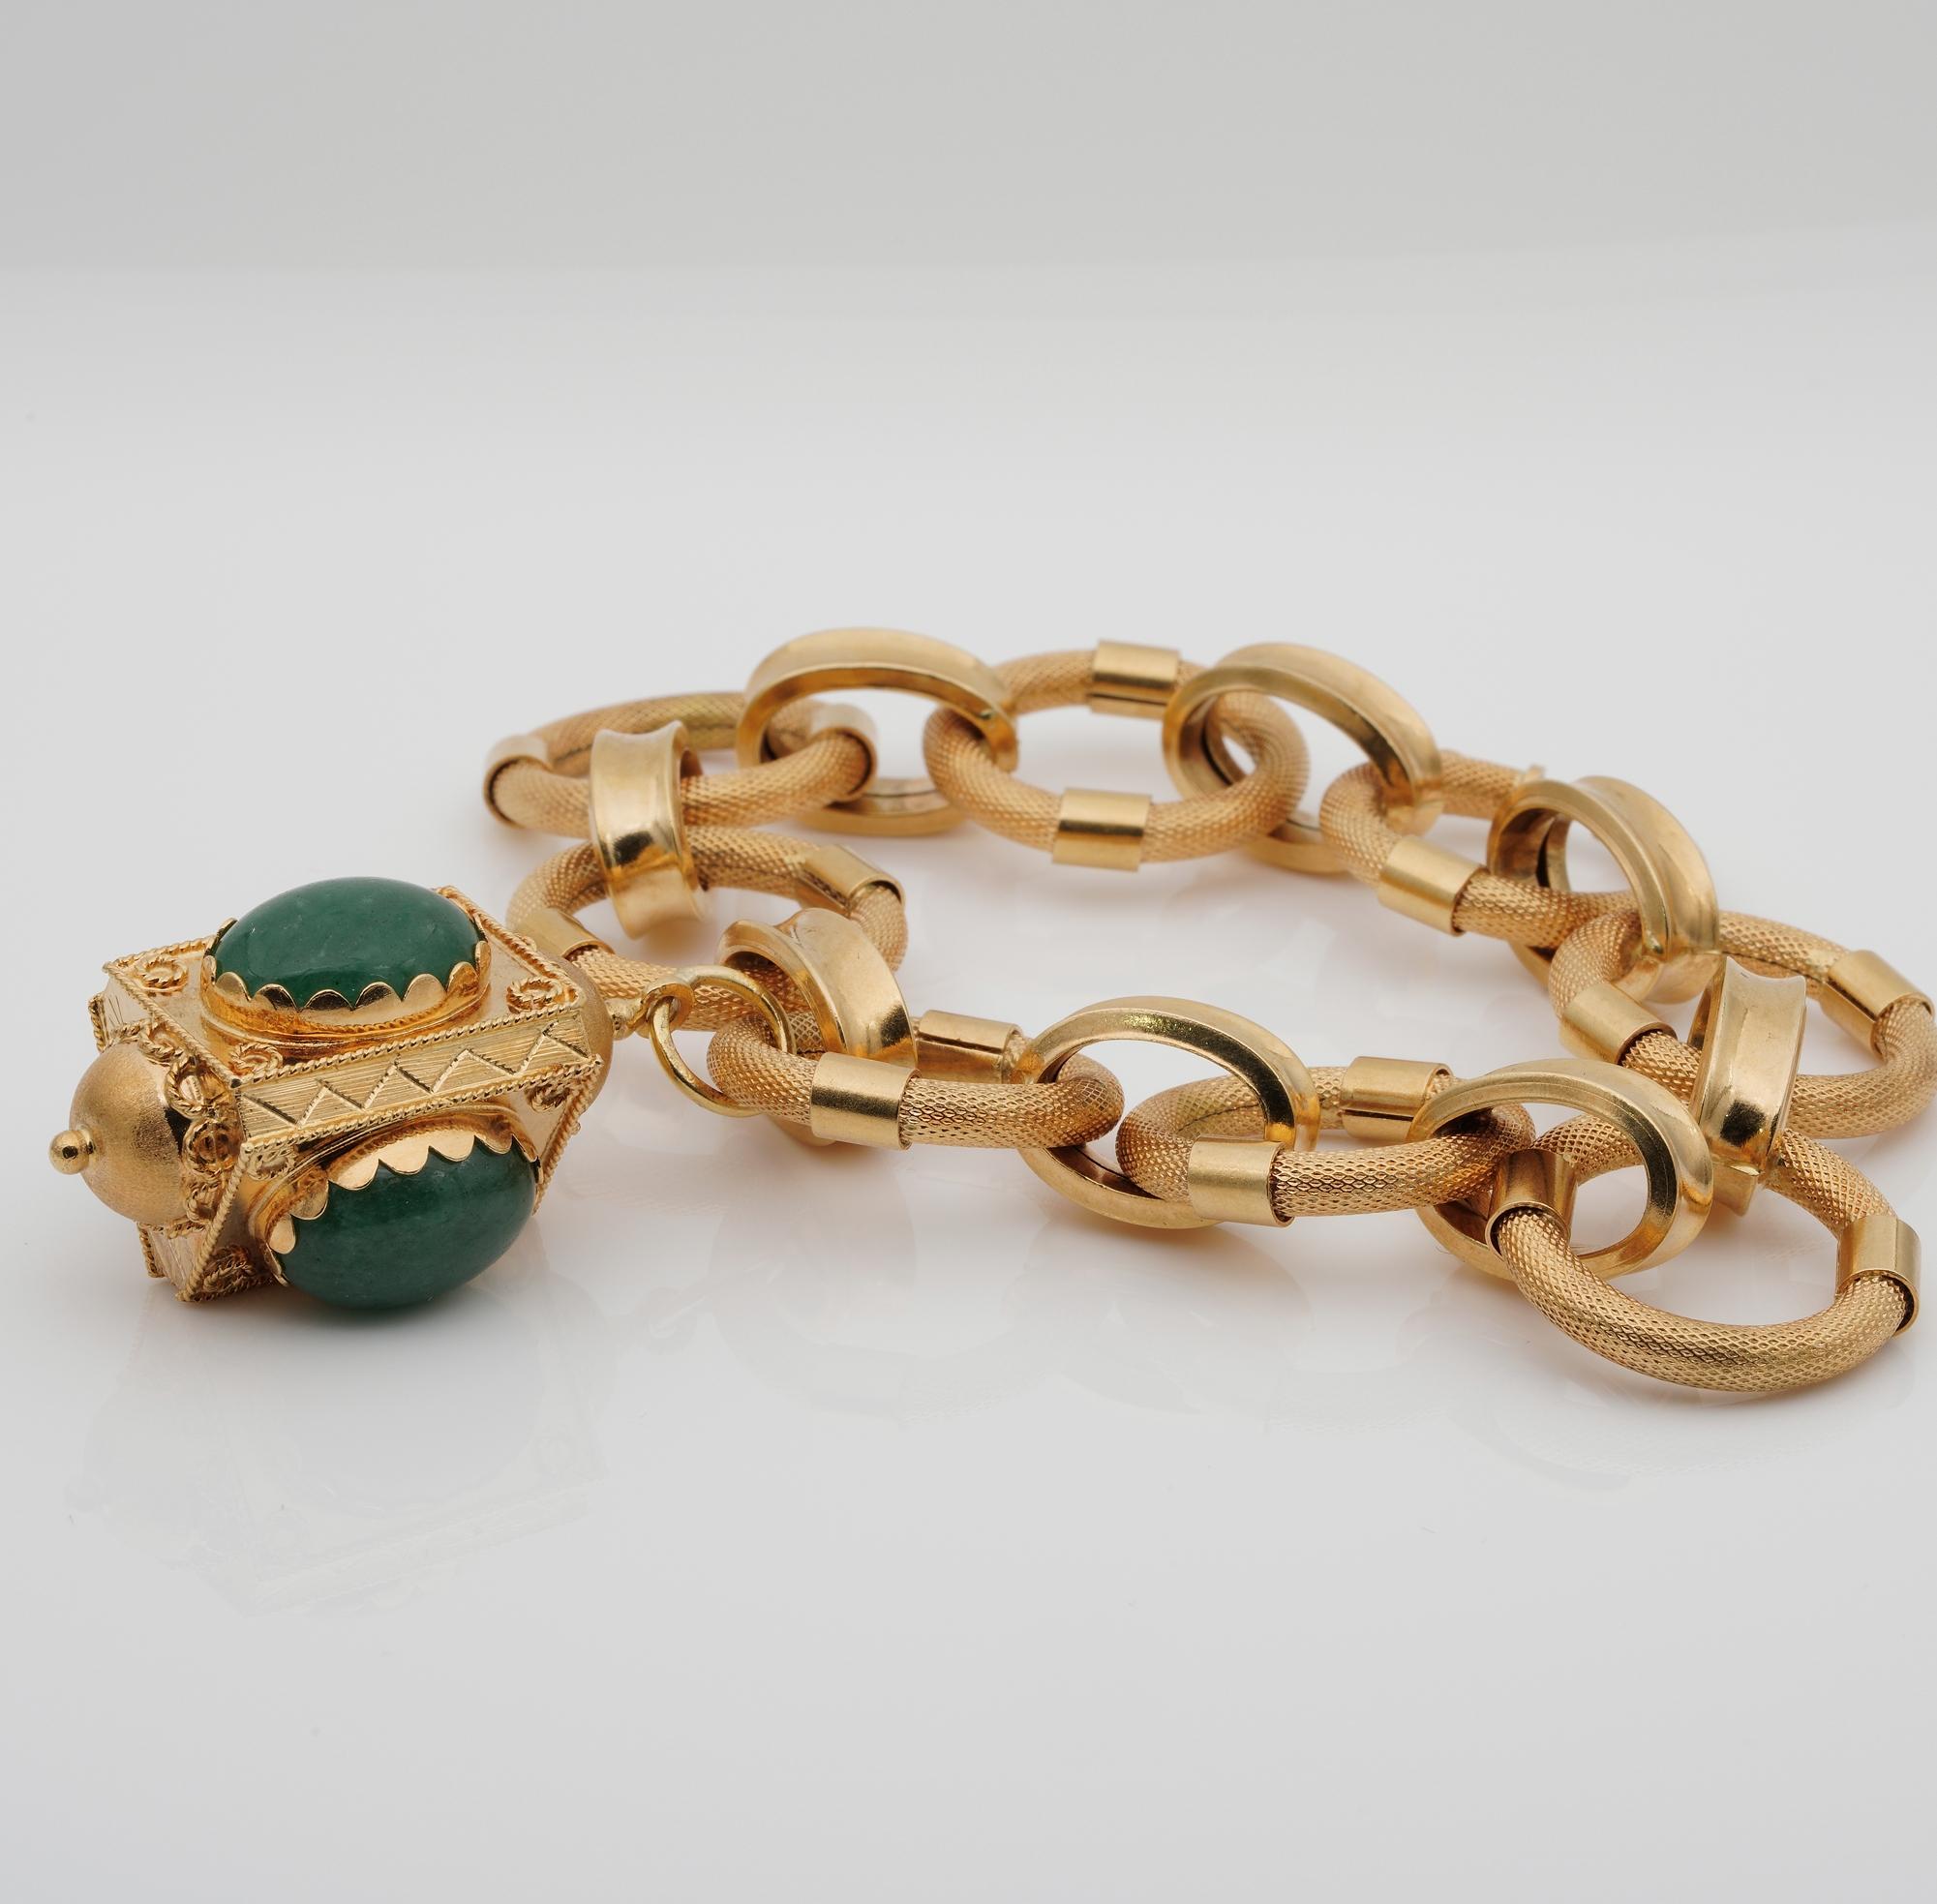 Superb 1960 Stylish Italian Charm Bracelet 18 Karat Gold In Good Condition For Sale In Napoli, IT